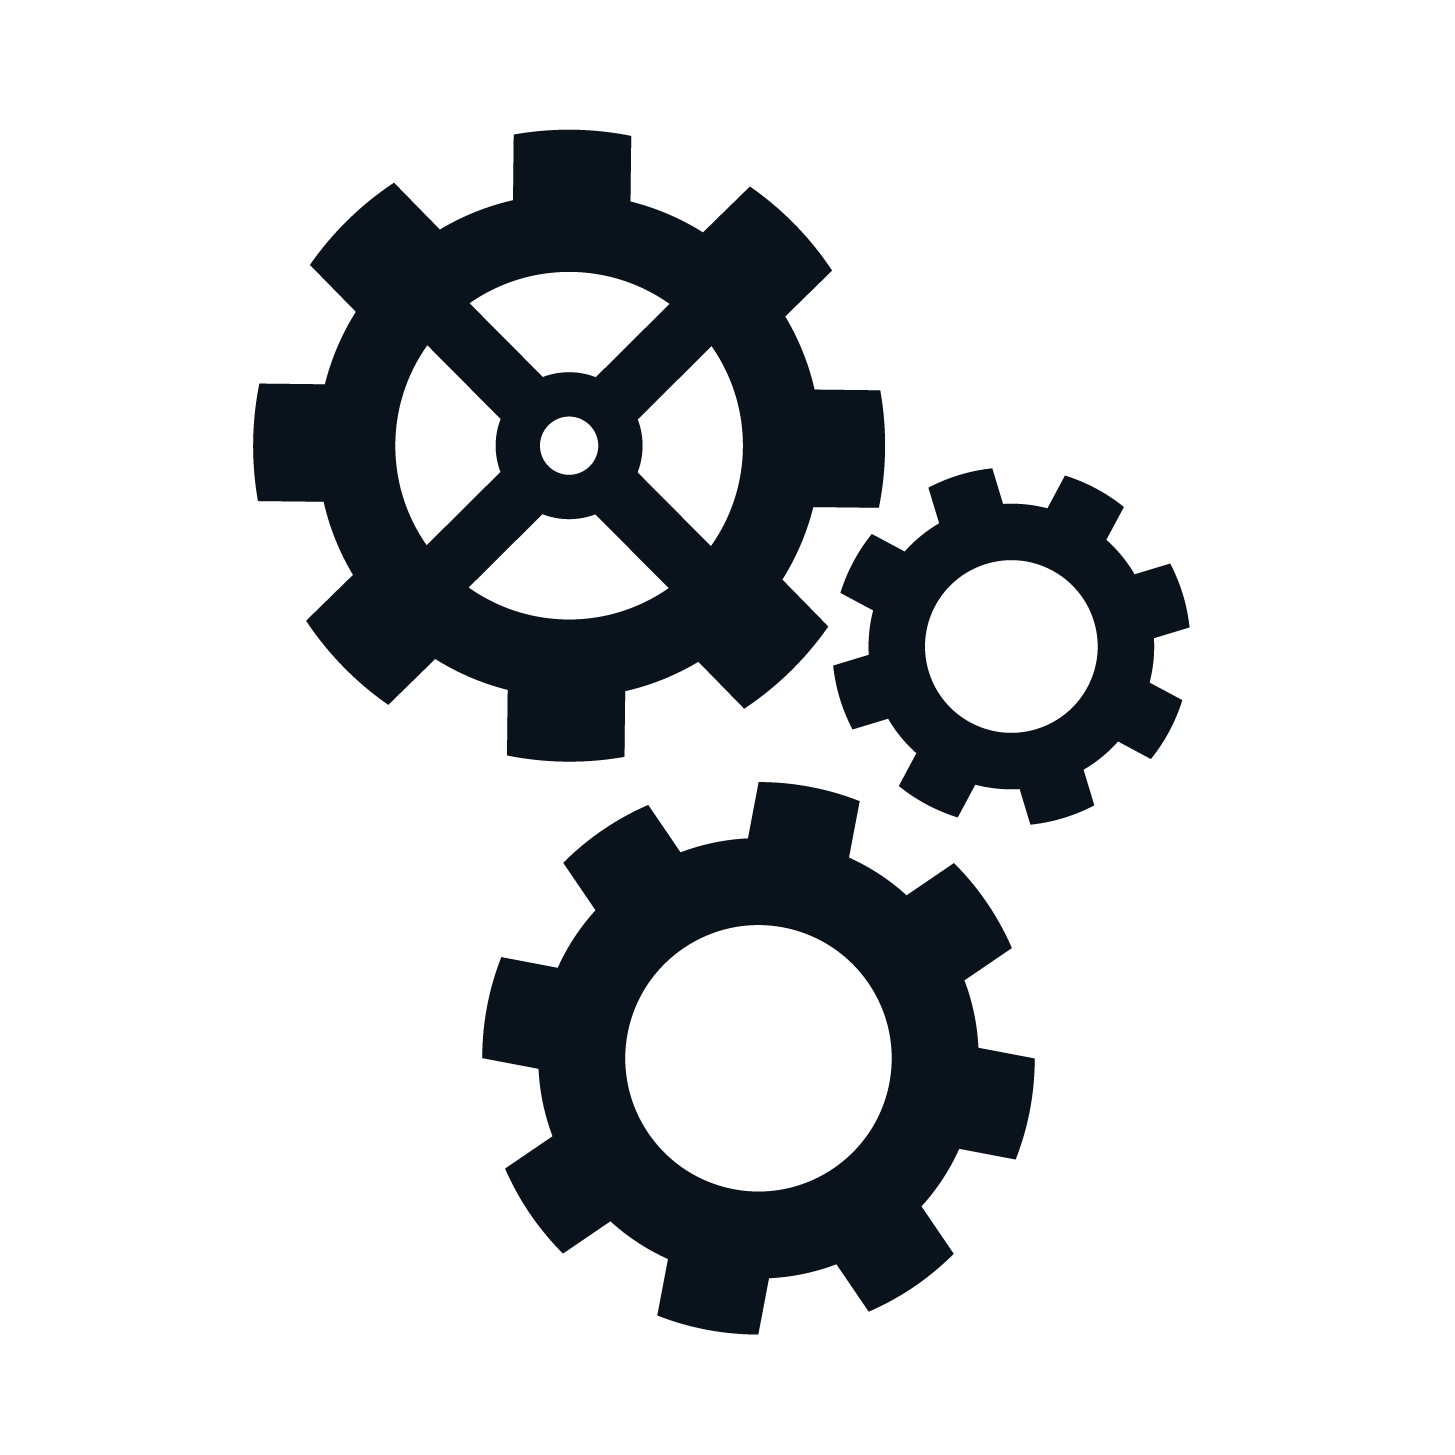 Three gears positioned in a group - part of Codecraft Works' logo